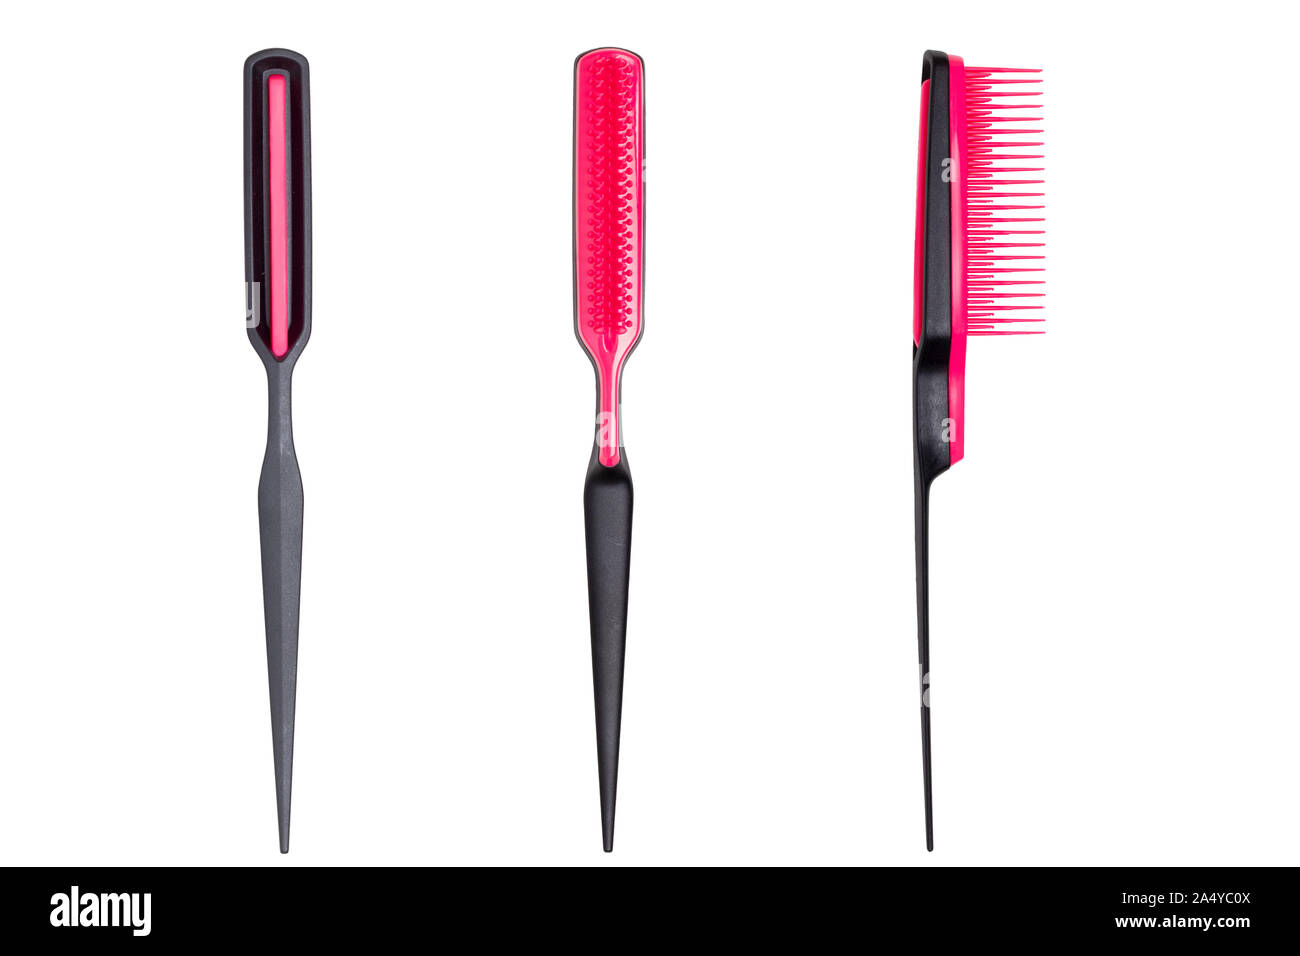 Hair combs isolated. Closeup of a stylish pink hair comb in three views. Macro photo of front, side and rear view. Concept of body and beauty care. Stock Photo